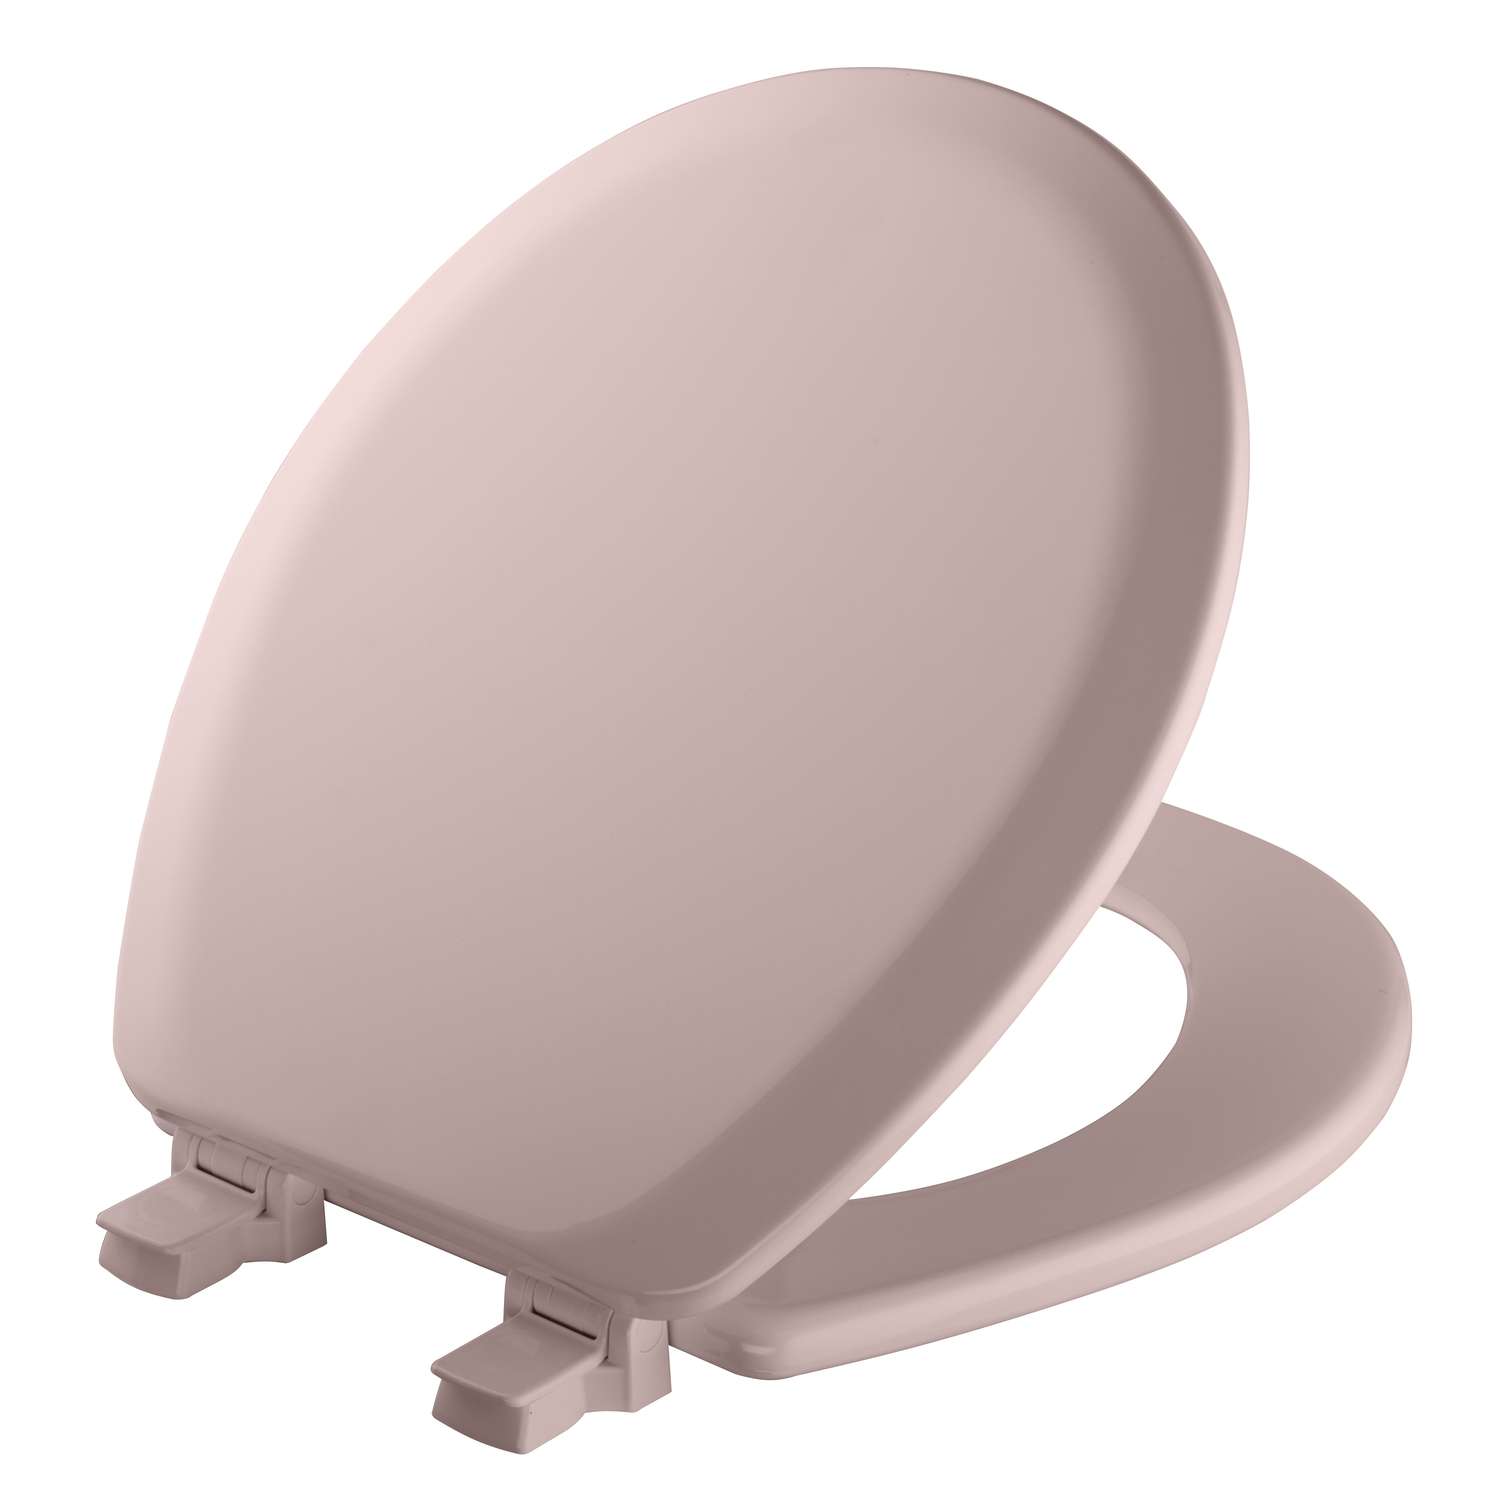 Mayfair Never Loosens Round Pink Molded Wood Toilet Seat - Ace Hardware